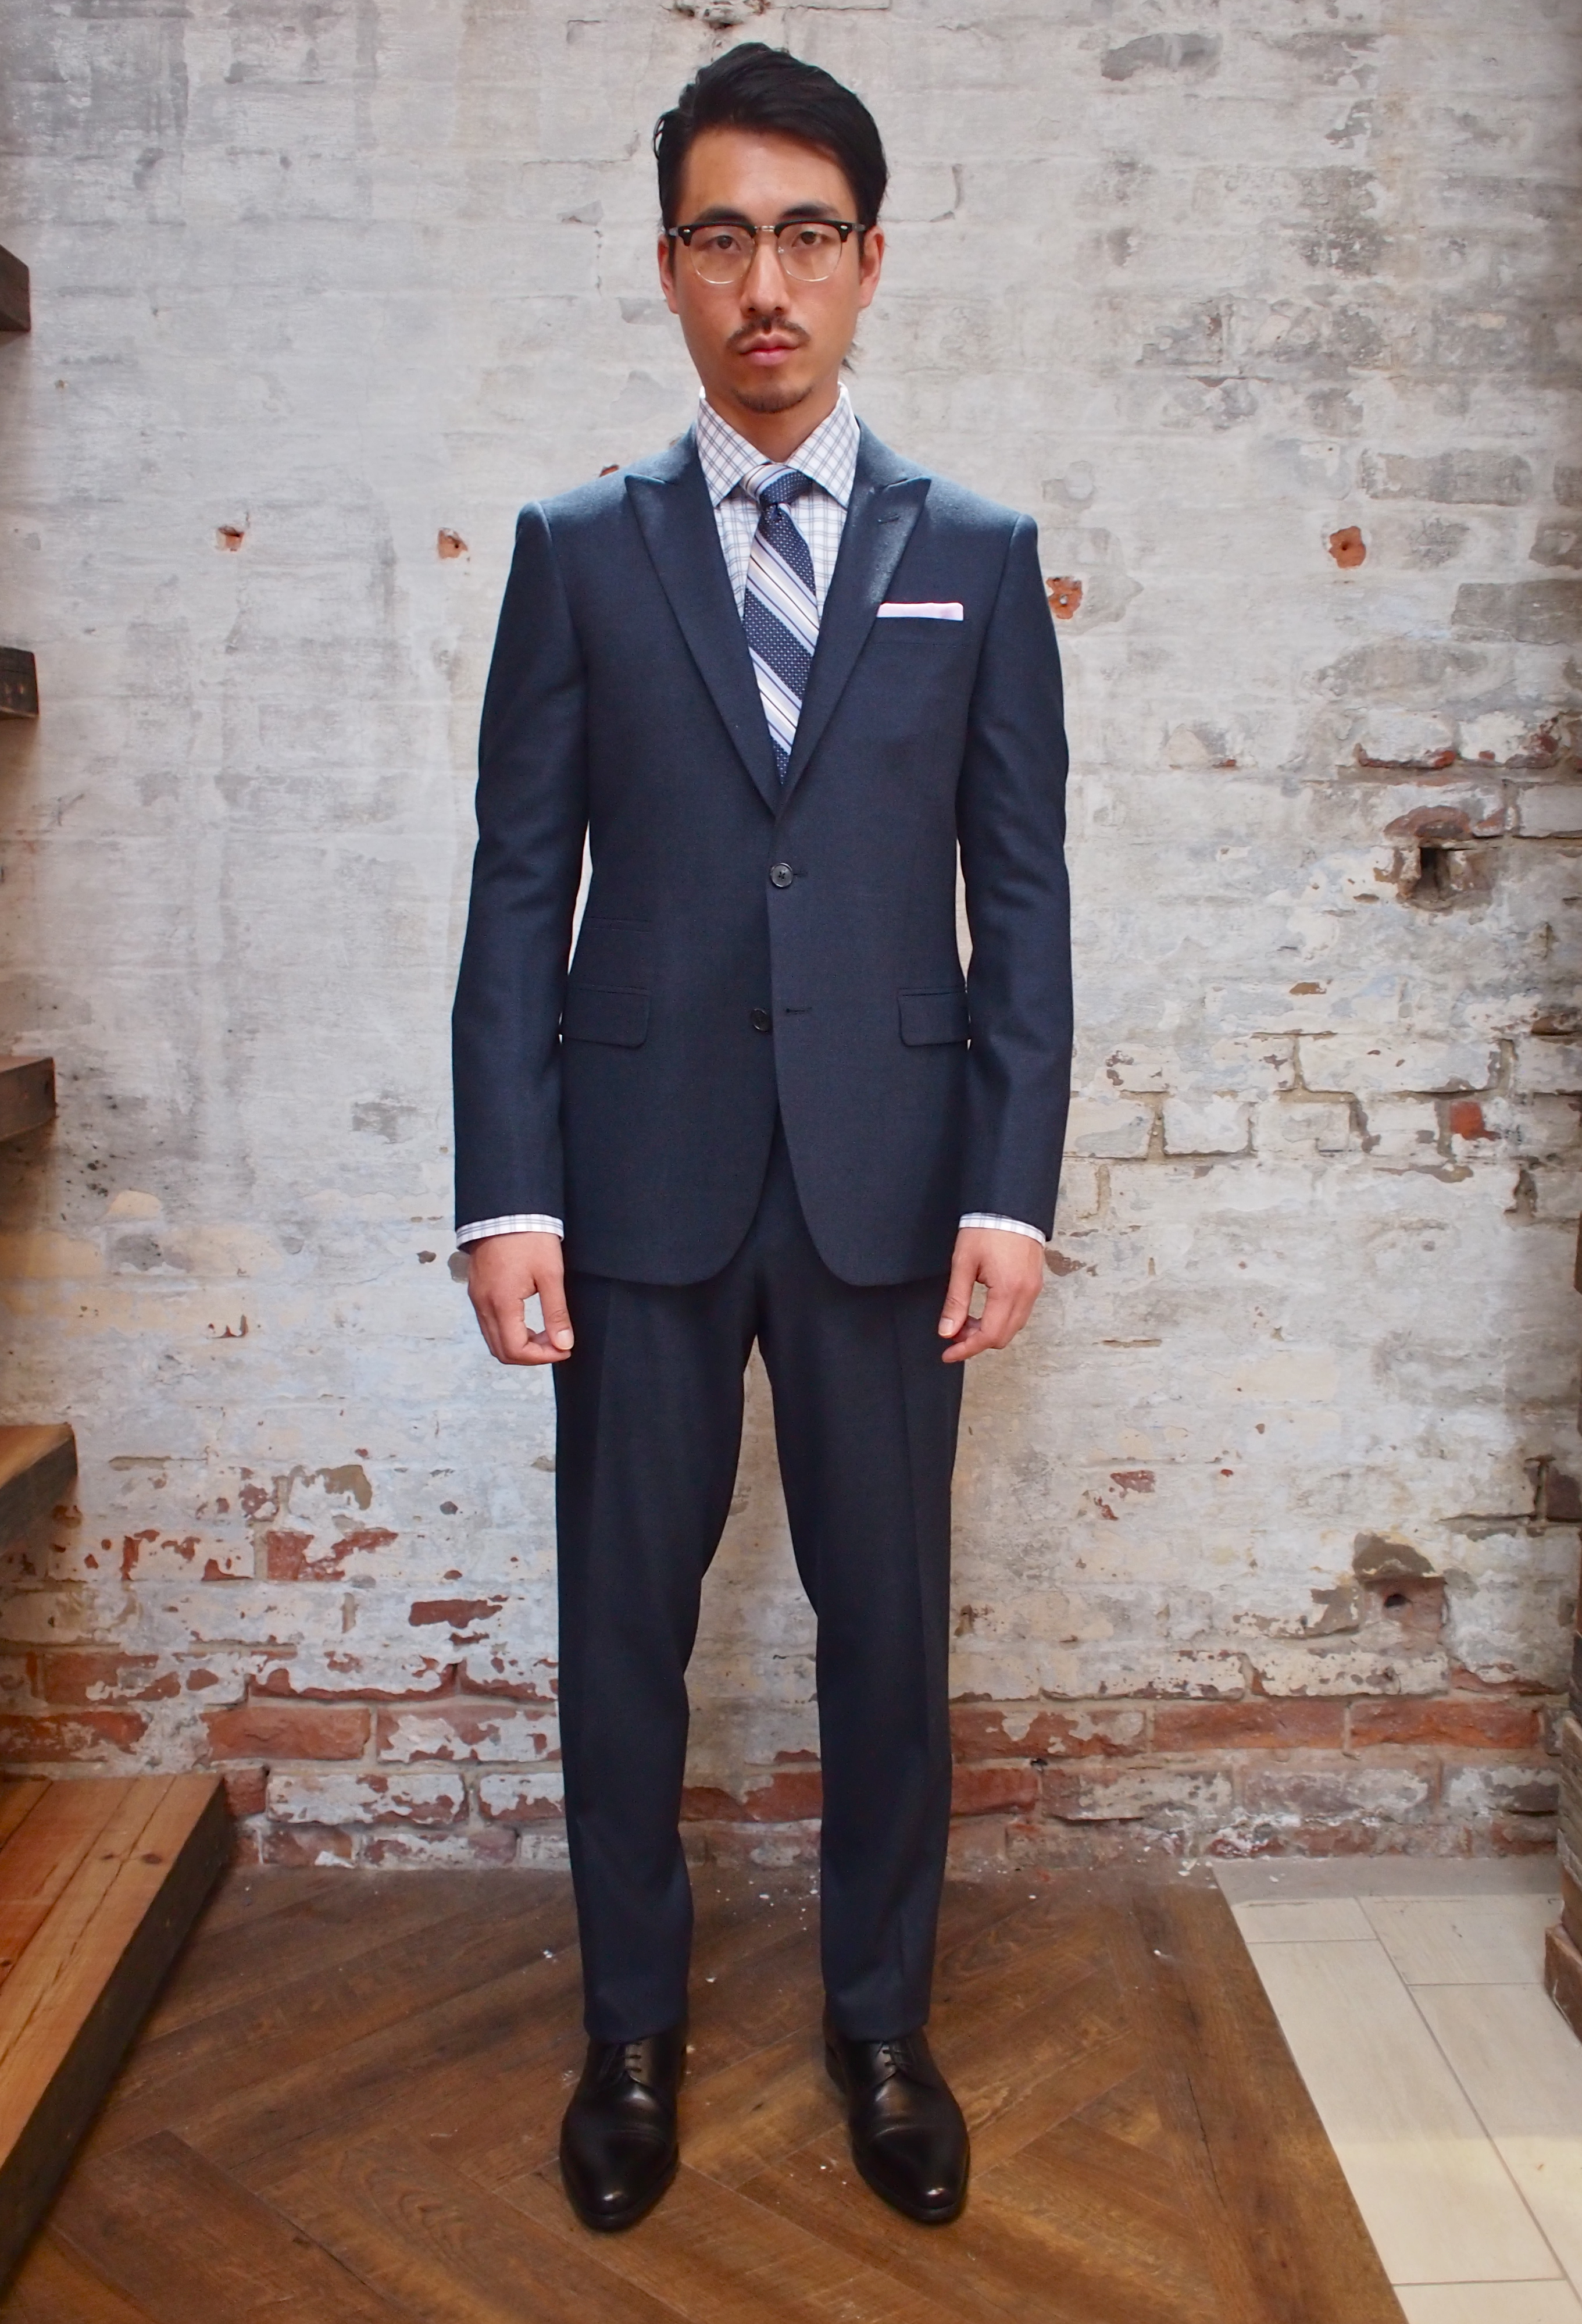 New Arrivals FW13: Great Suits By Hilton | GOTSTYLE